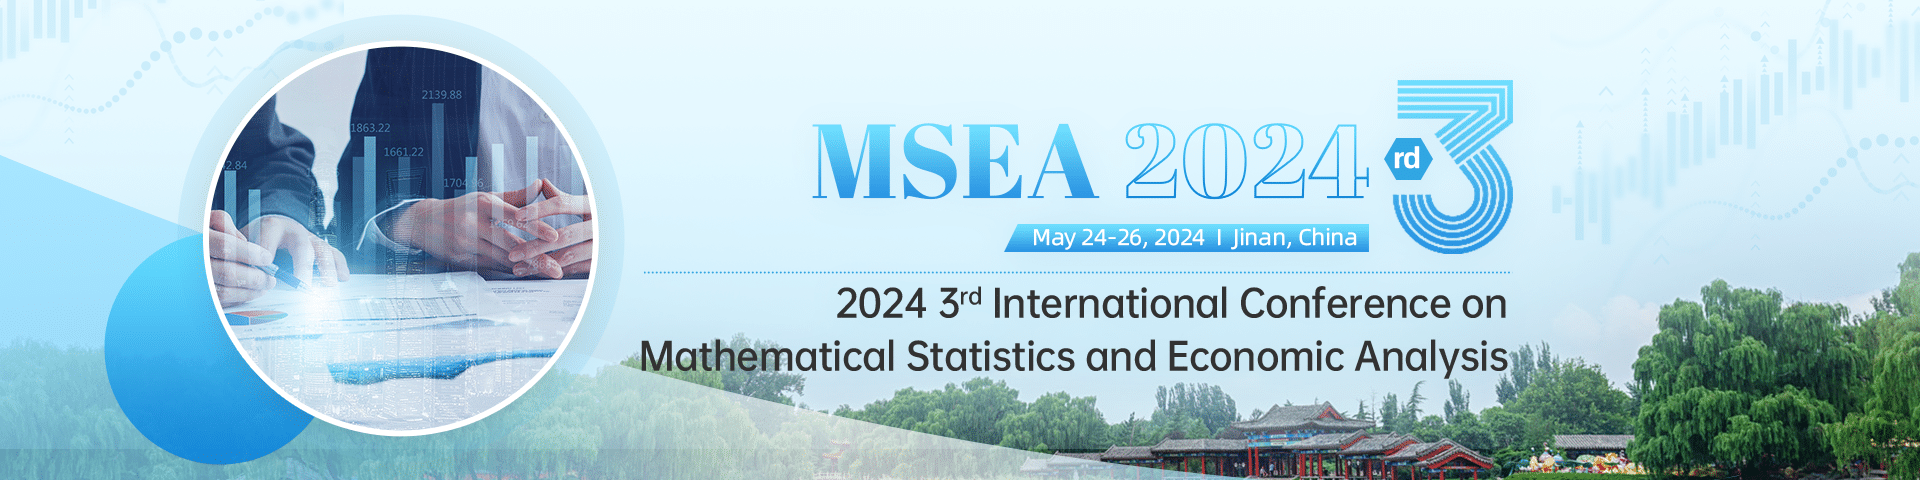 2024 3rd International Conference on Mathematical Statistics and Economic Analysis(MSEA 2024)